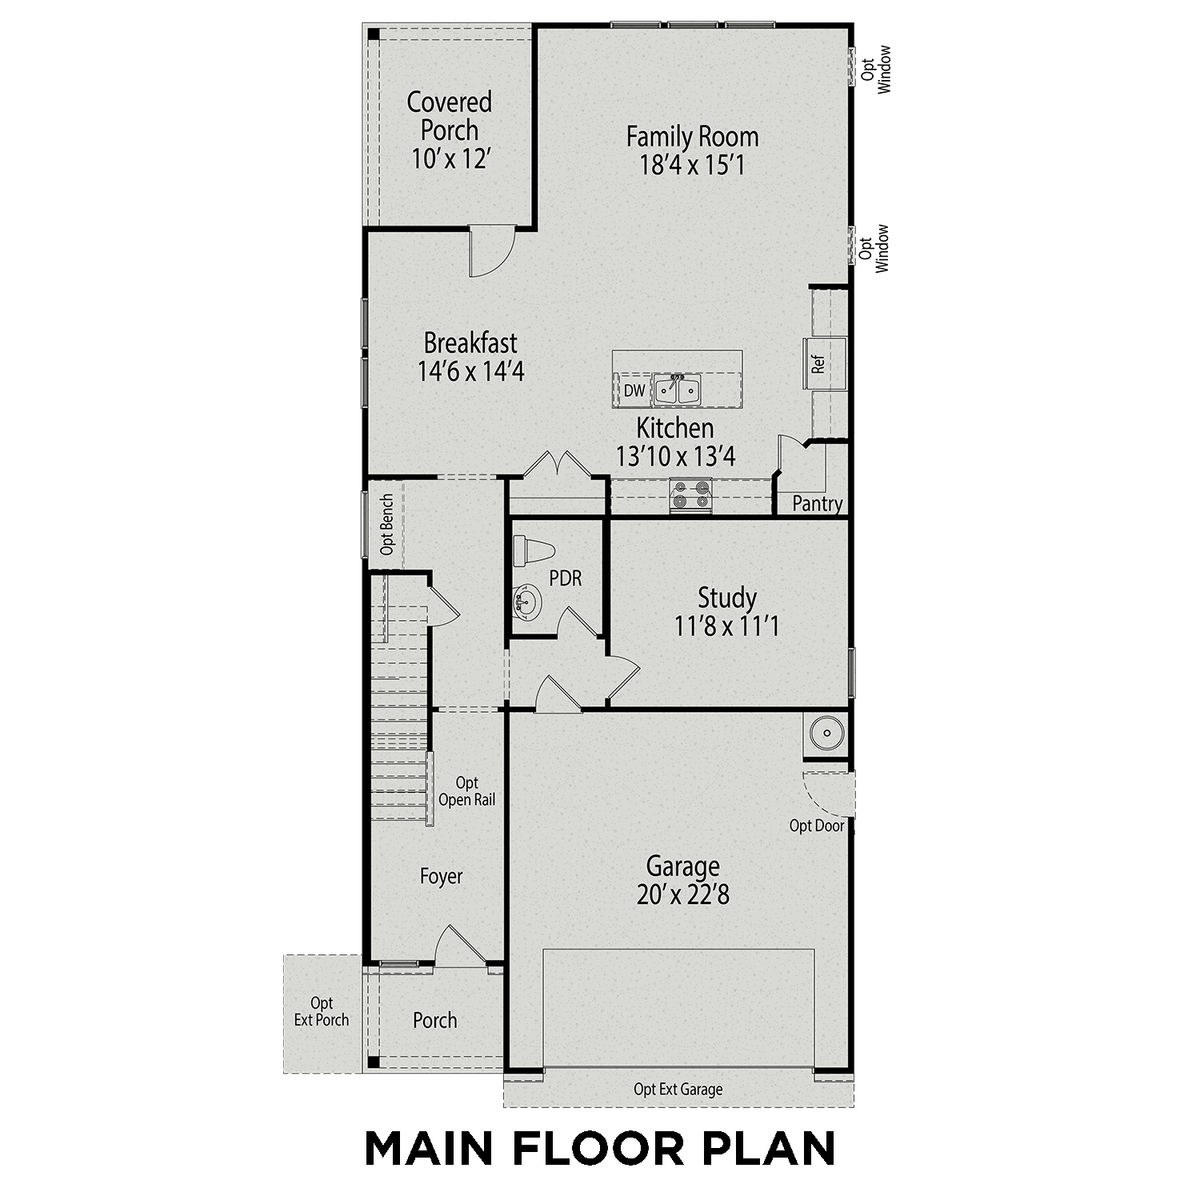 1 - The Preston A floor plan layout for 28 Fairwinds Drive in Davidson Homes' Gregory Village community.